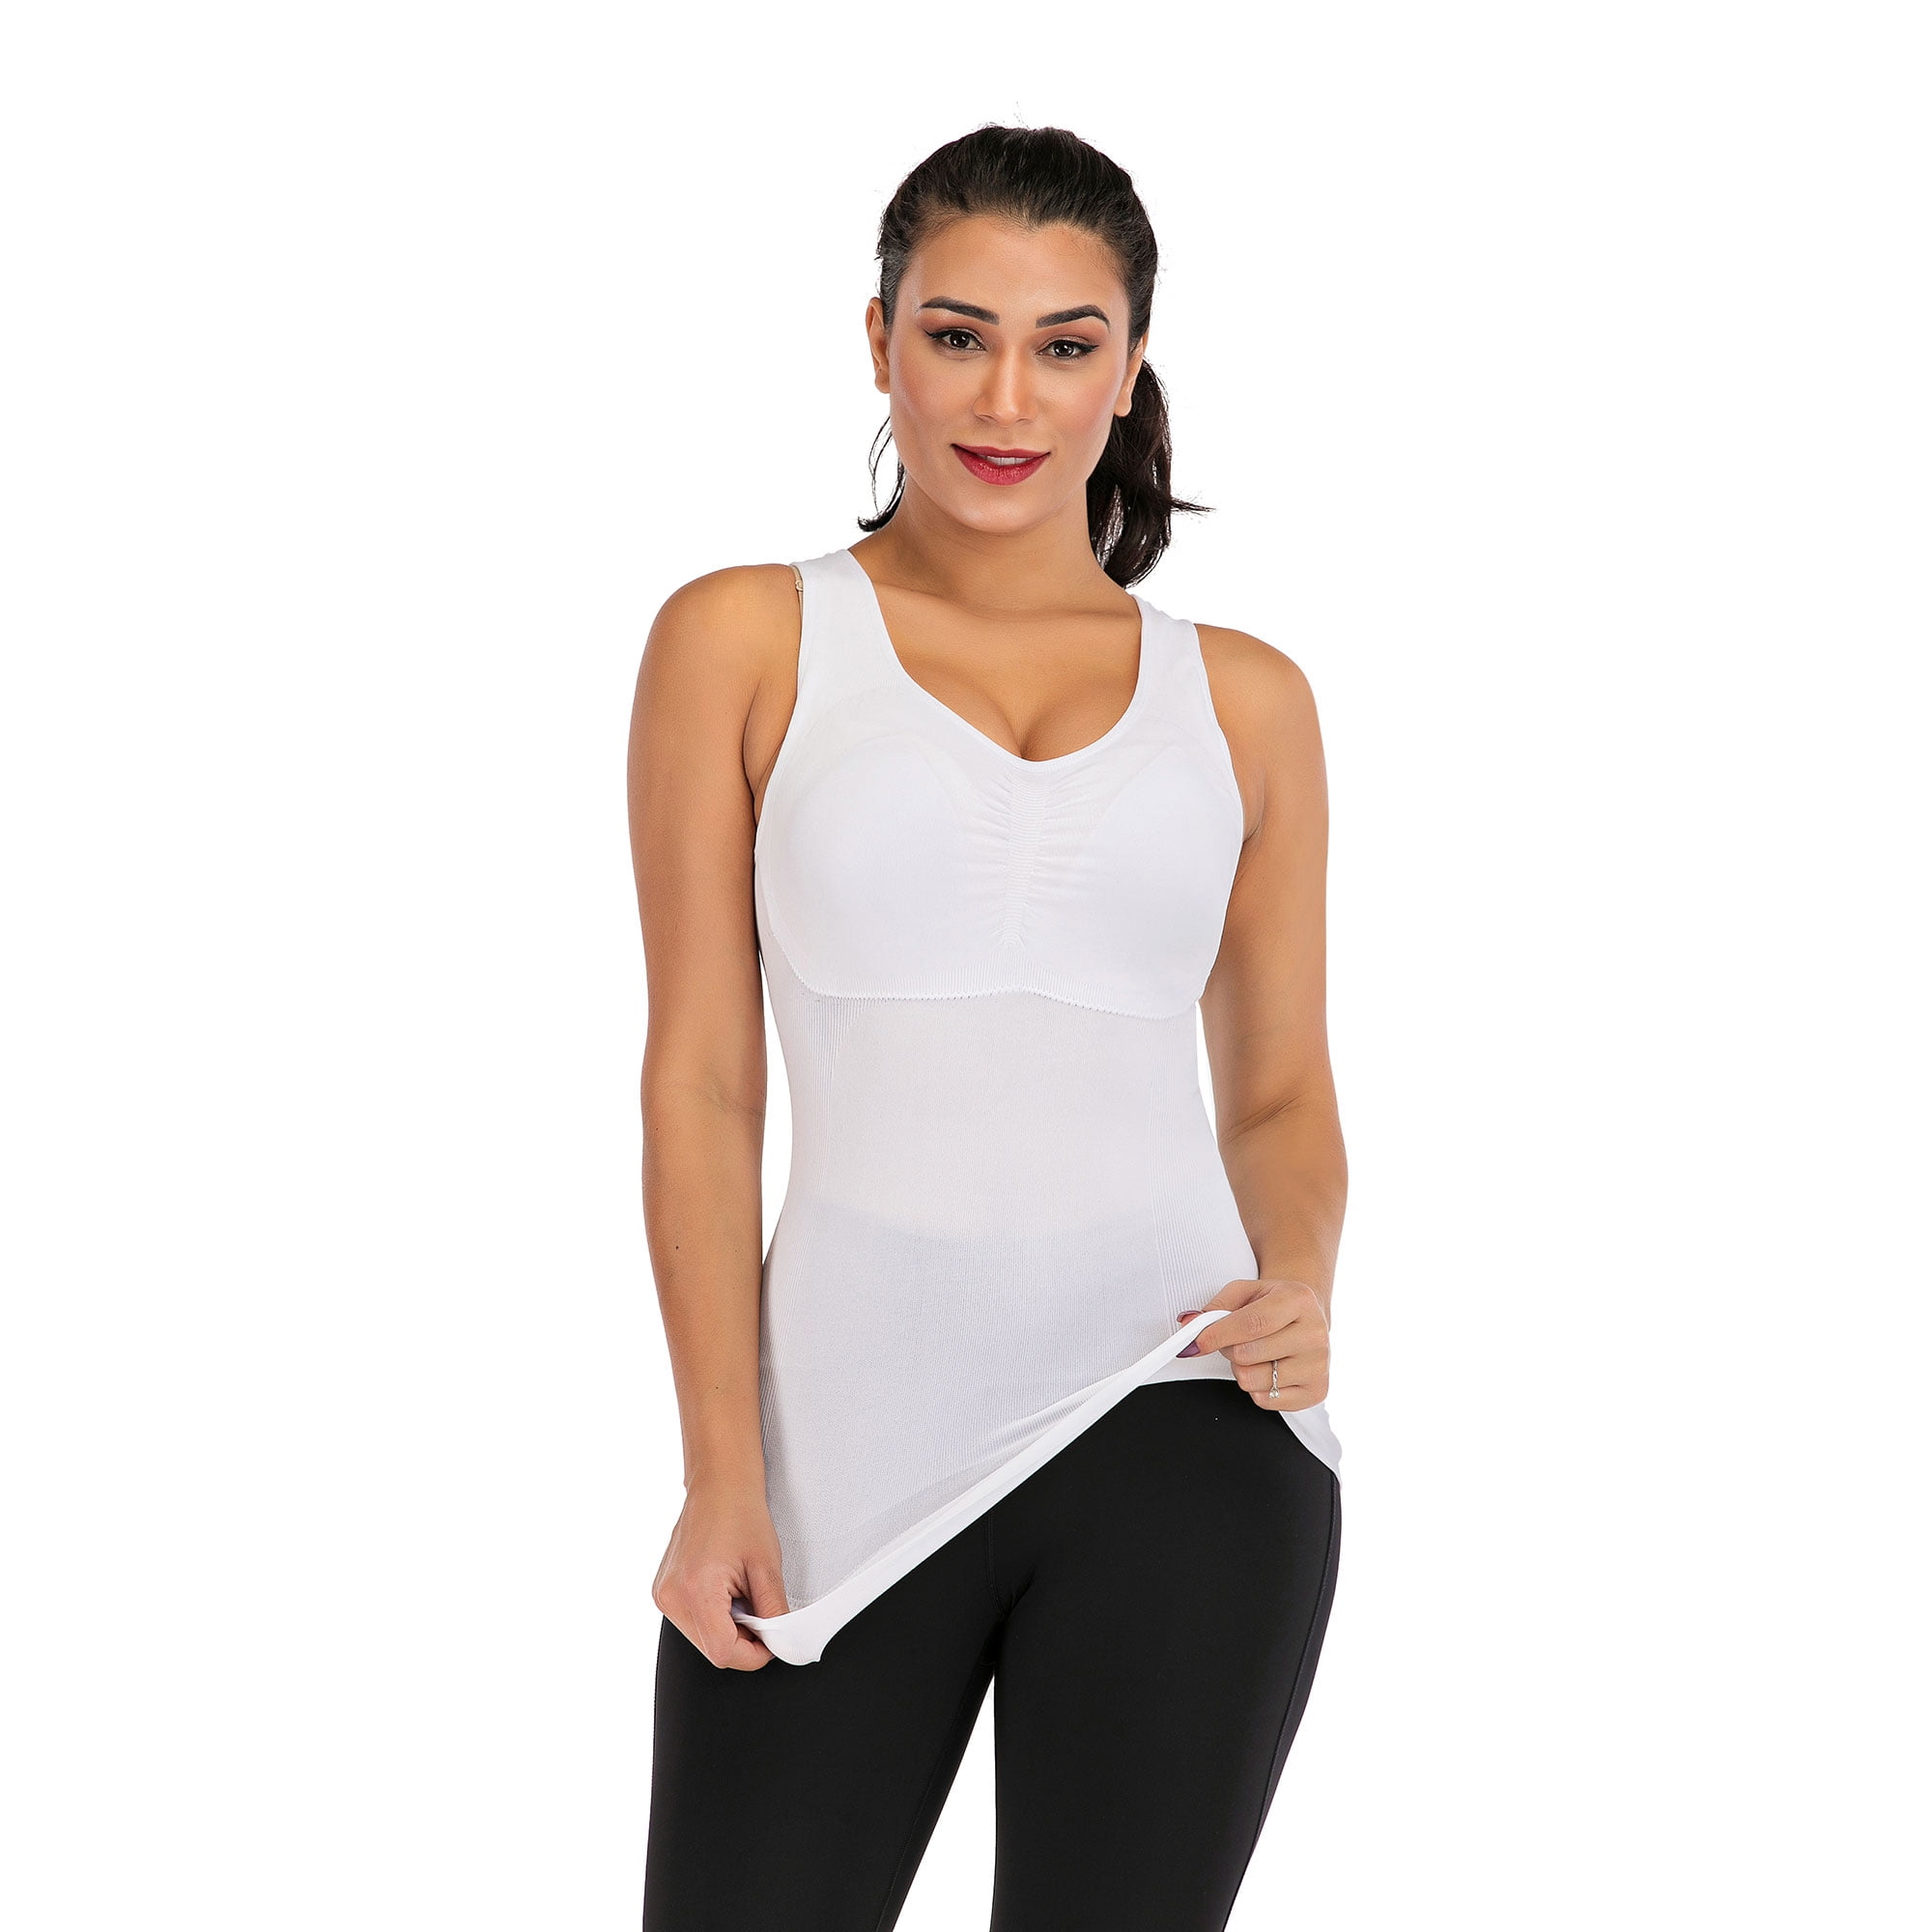 STTOAY Women's Seamless Shaping Tank Tops Tummy Control Body